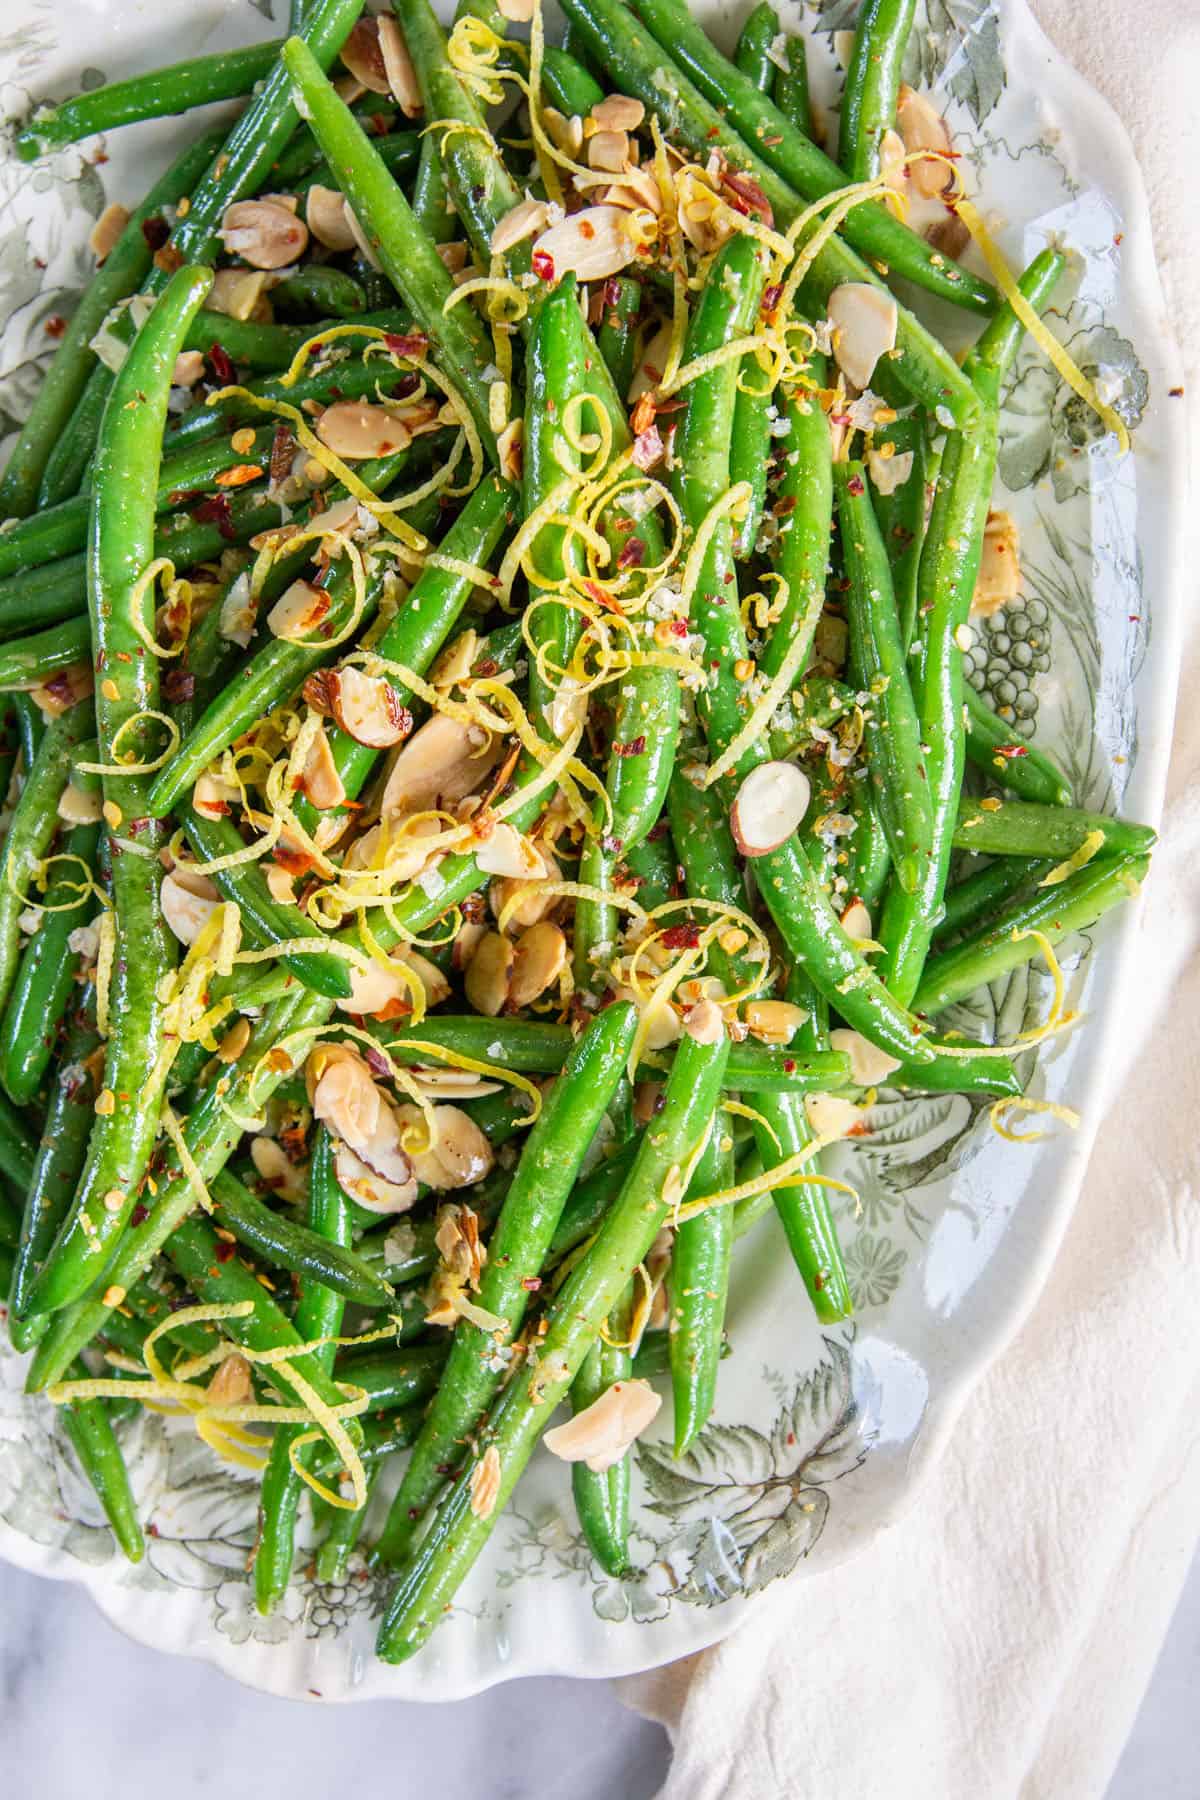 A Simple Recipe for Lemon-Laced Green Bean Almondine